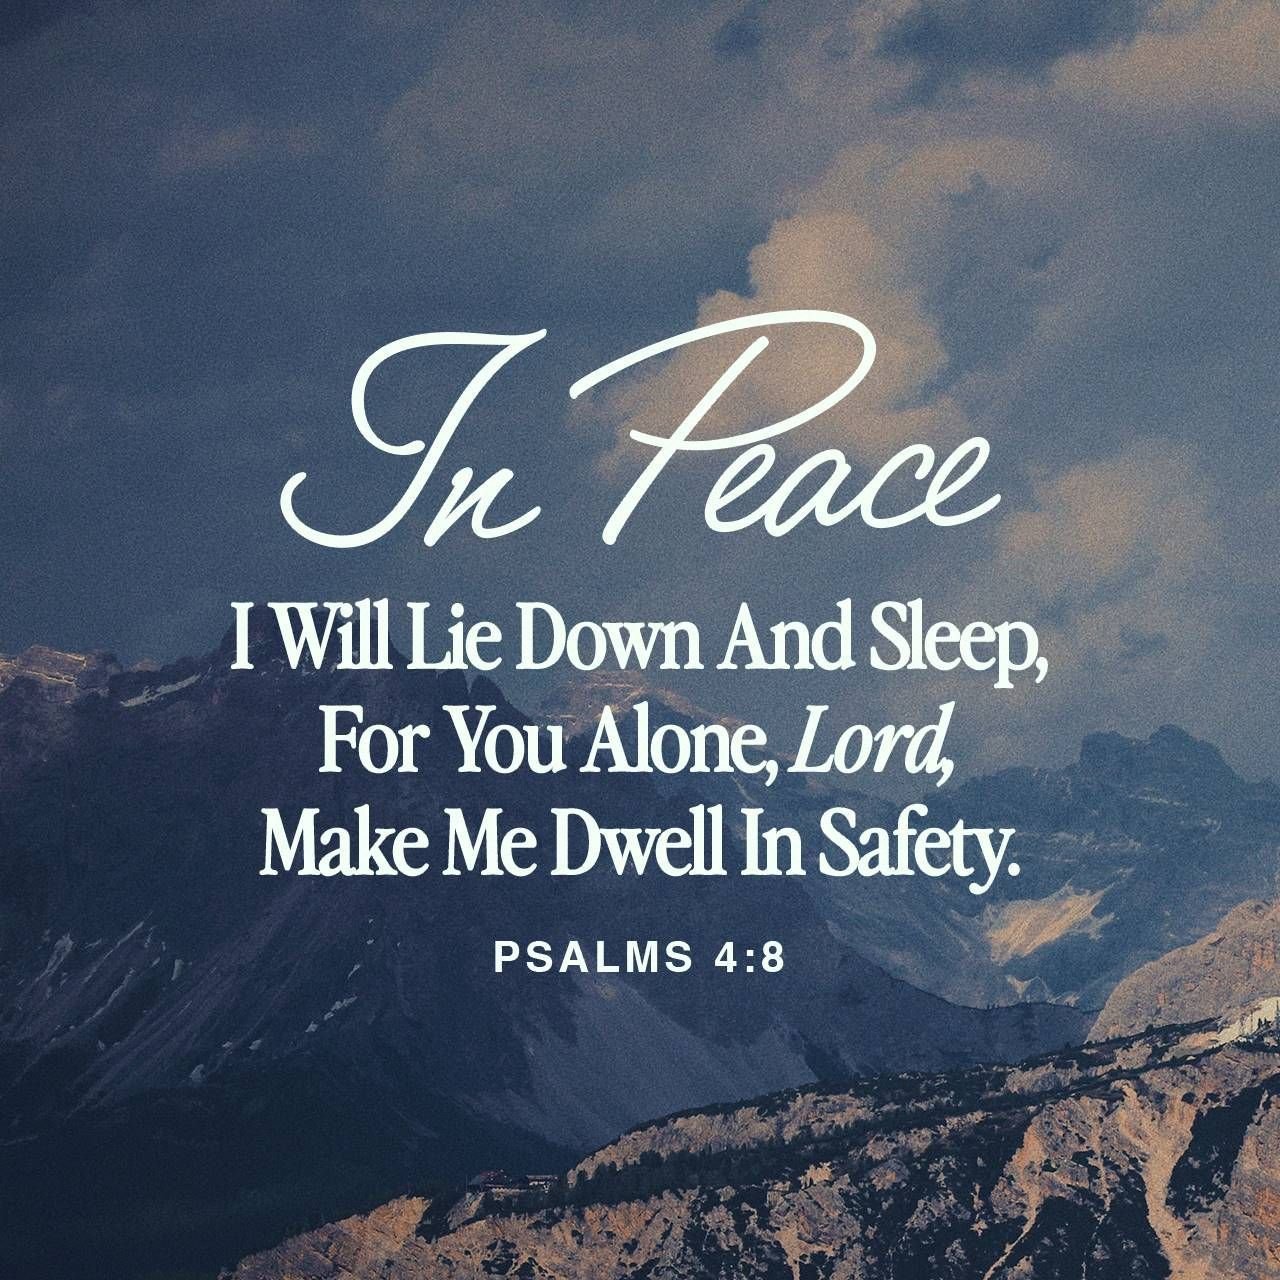 Oh, the peace that comes from the Lord and to rest in Him.  We pray that each of you experience that peace in your life today!